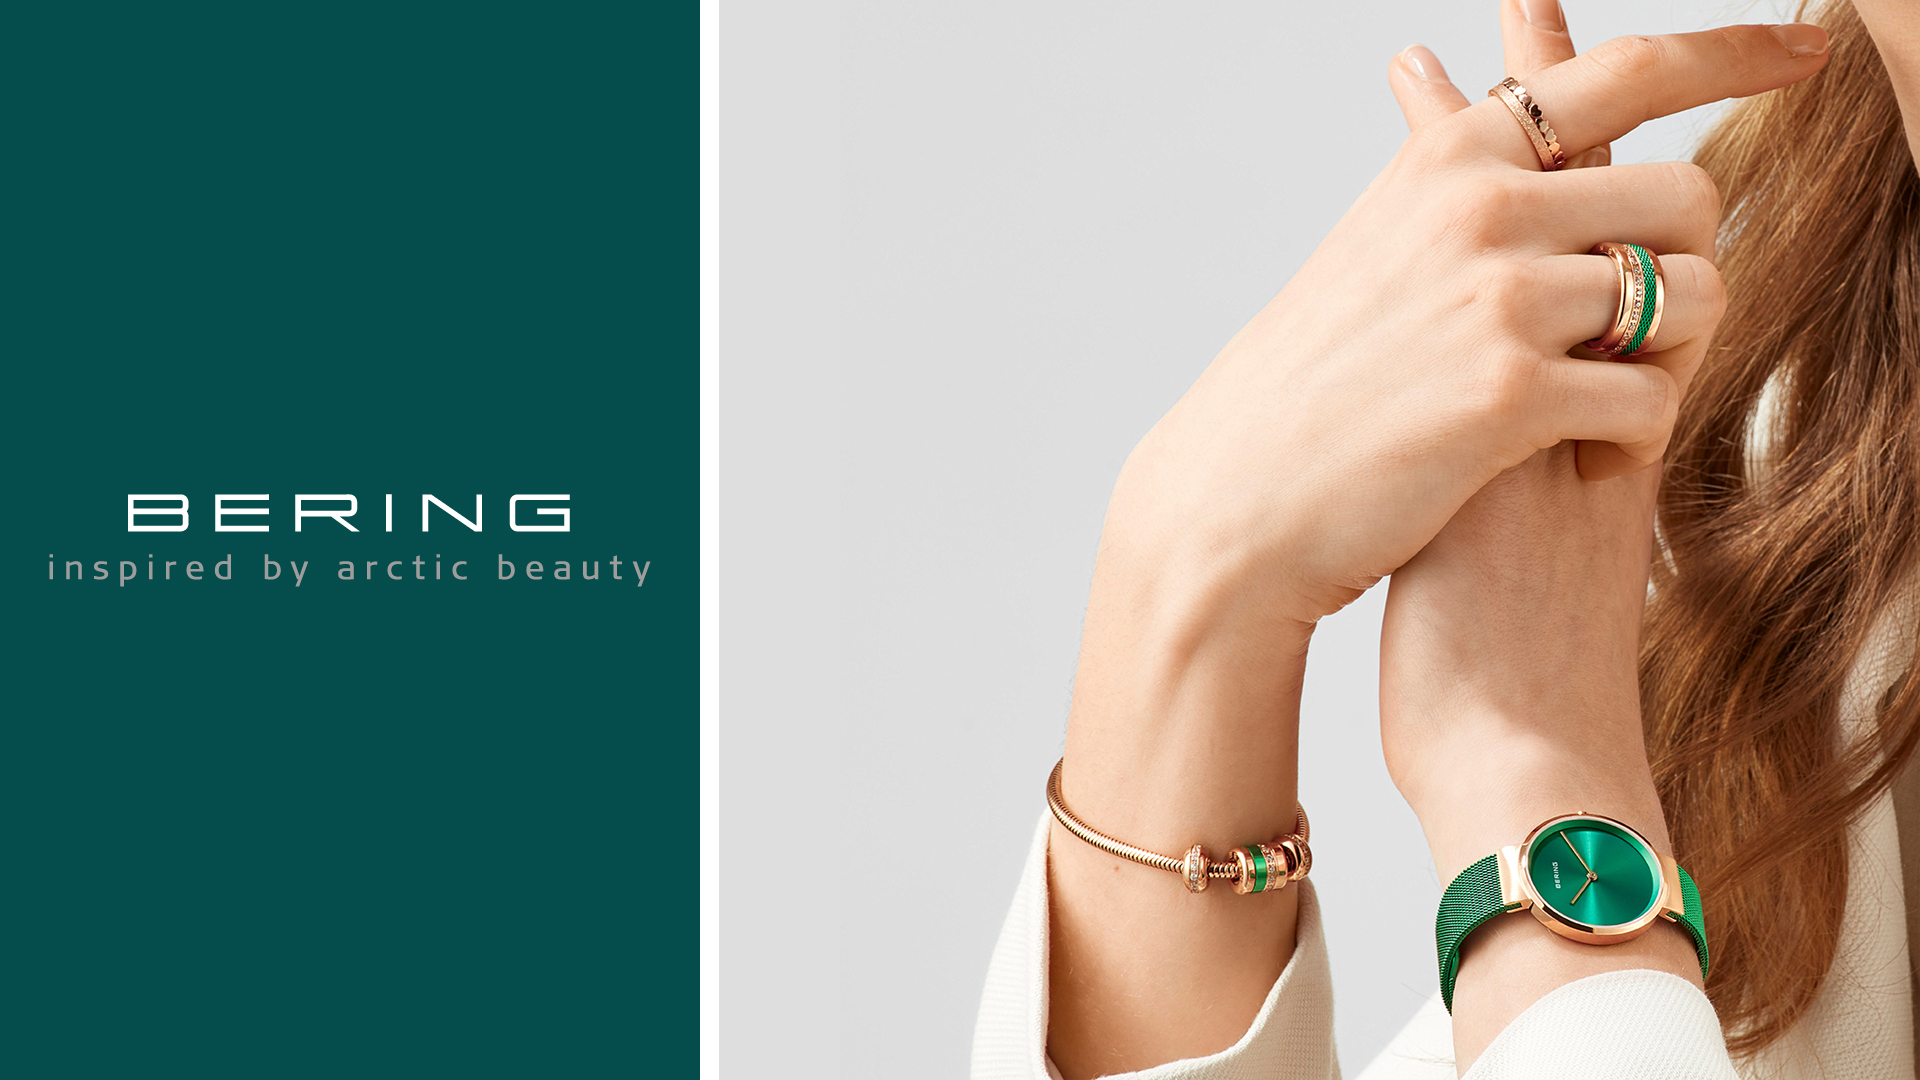 BERING - inspired by arctic beauty